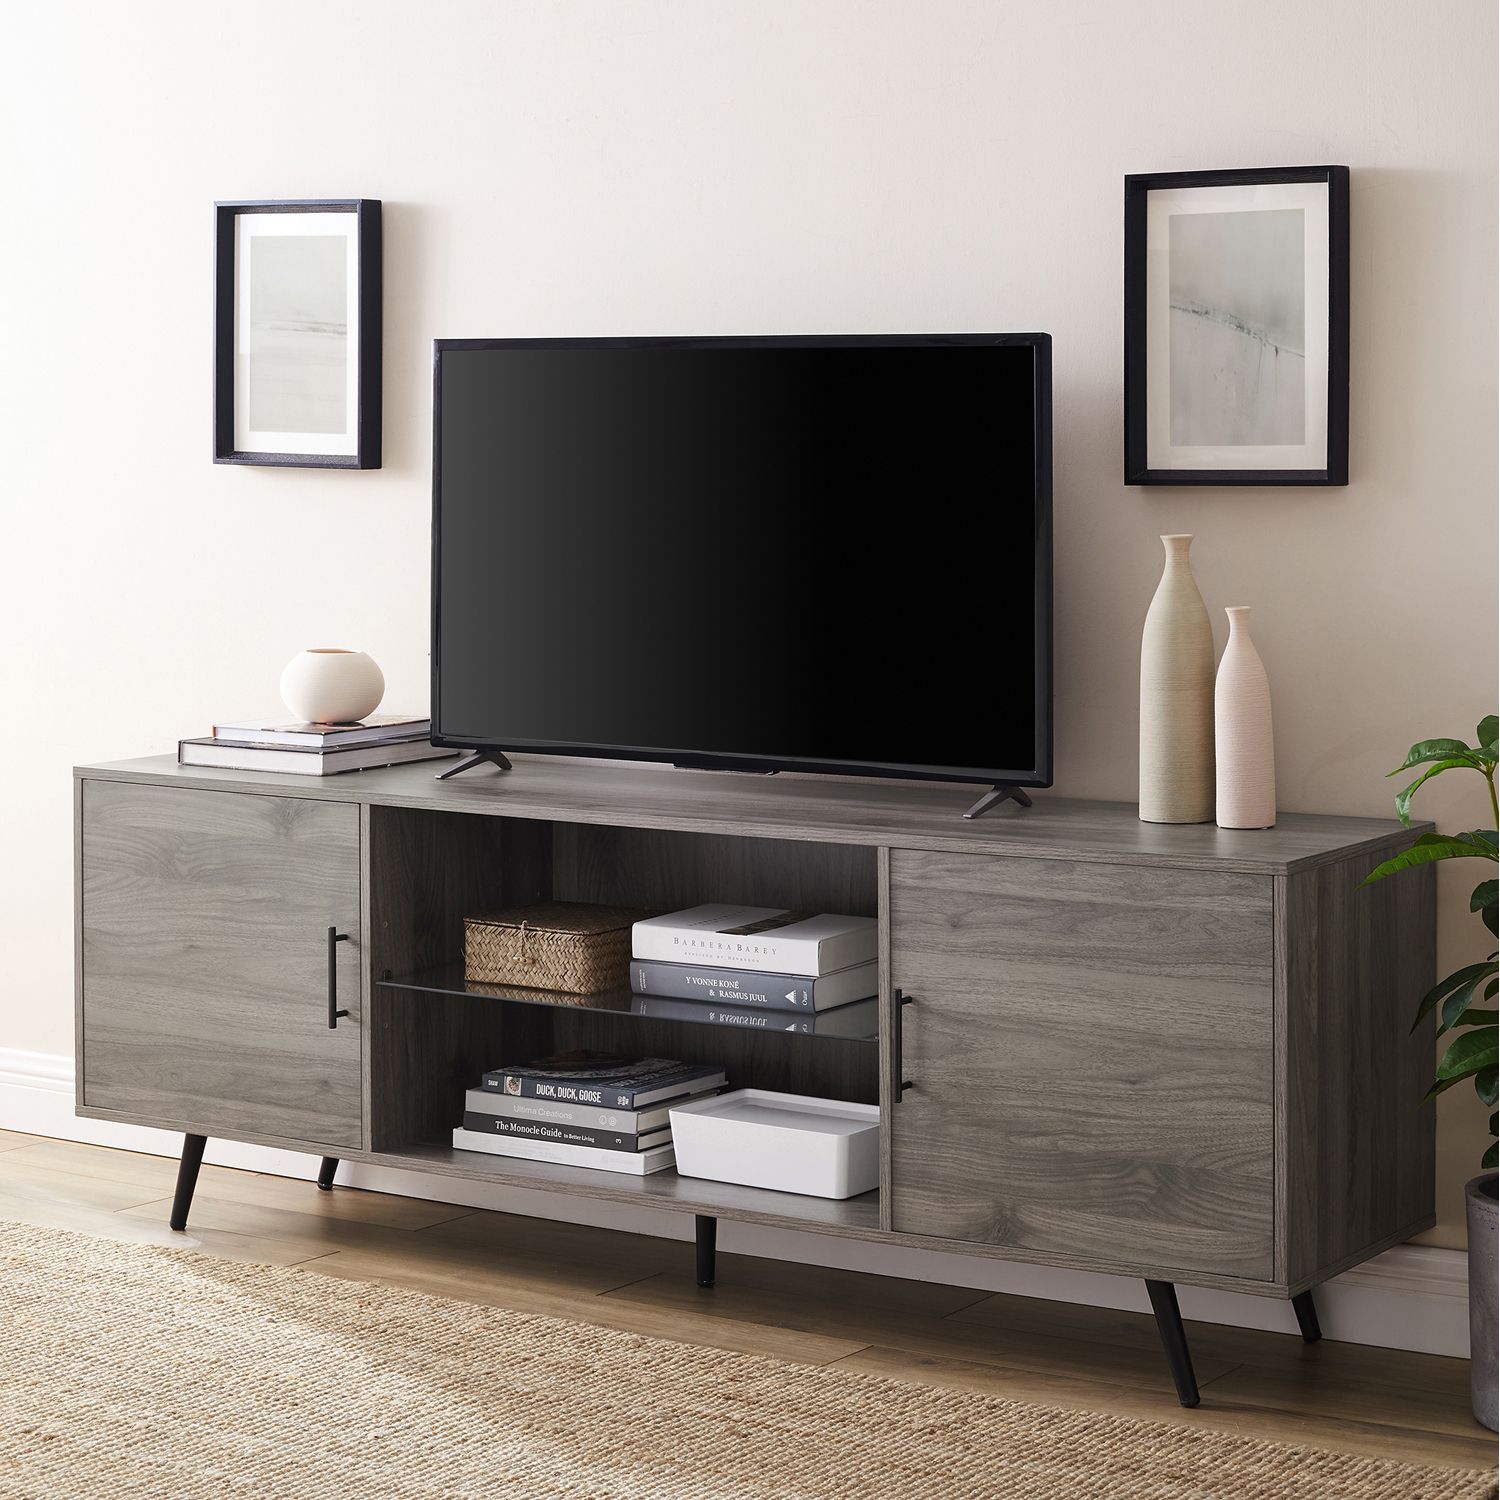 Wide Tv Stand With Glass Shelf – Pier1 For Orsen Wide Tv Stands (View 1 of 15)